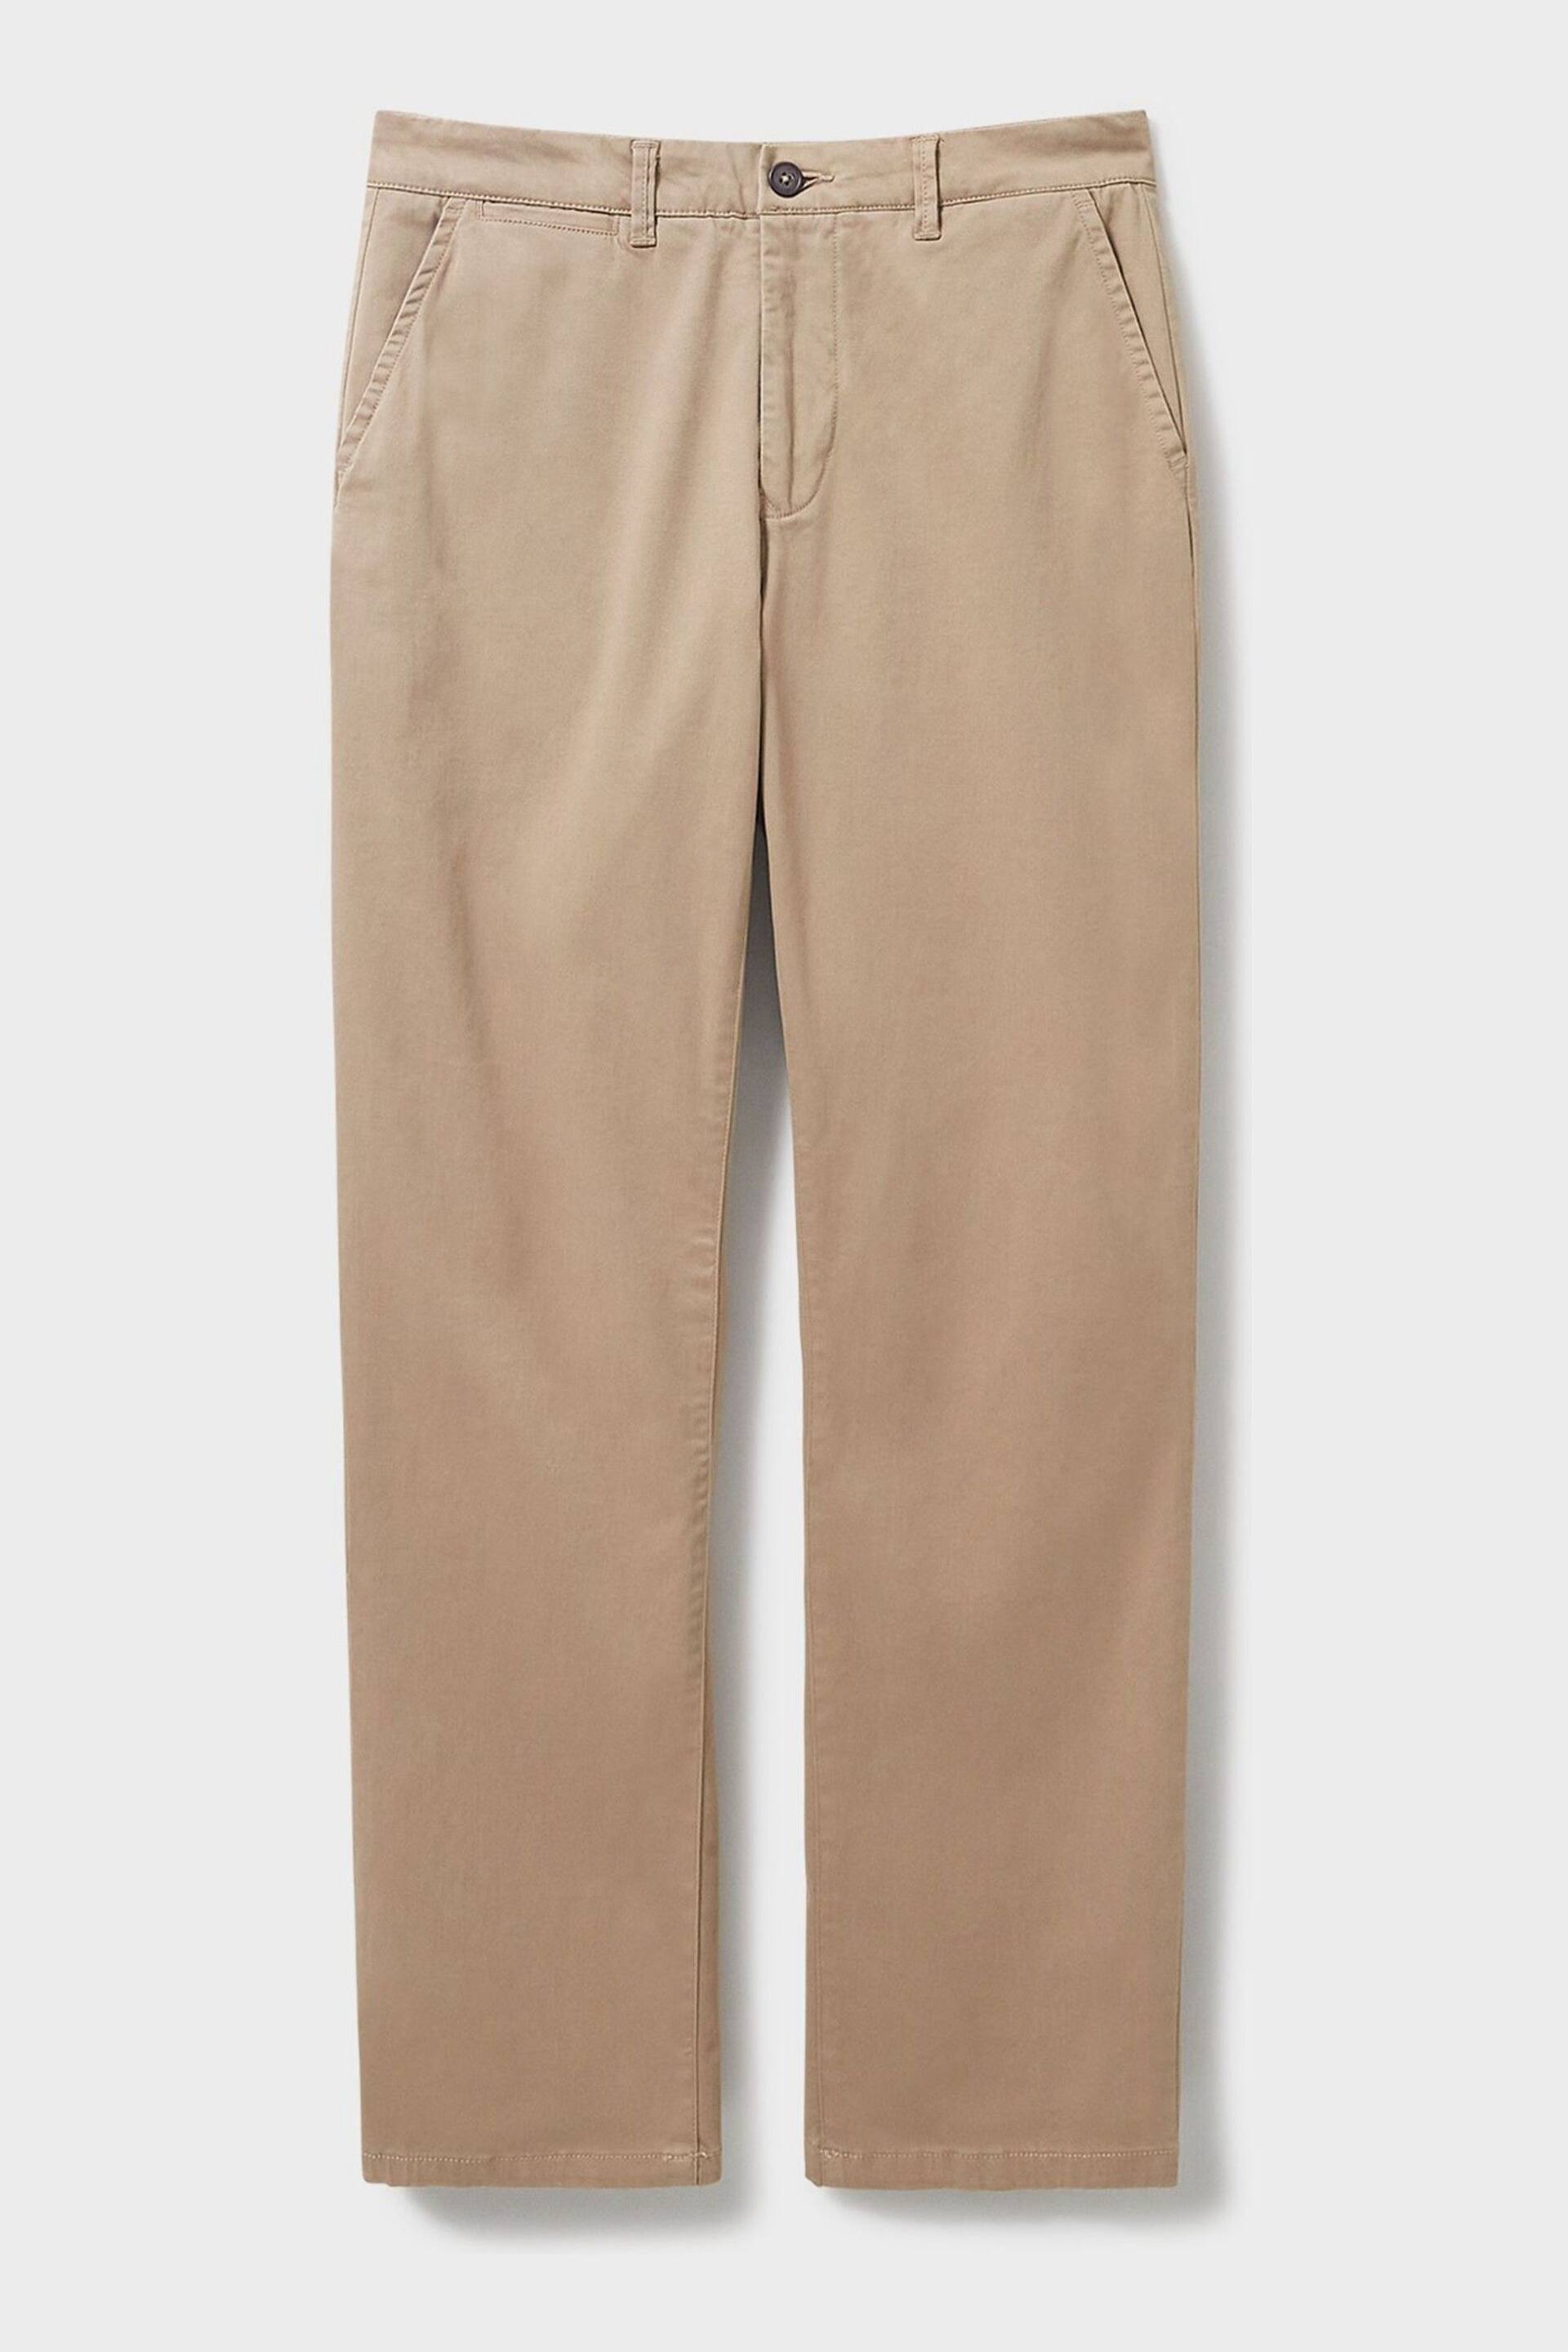 Buy Crew Clothing Company Cotton Straight Fit Chino Trousers - Image 4 of 4